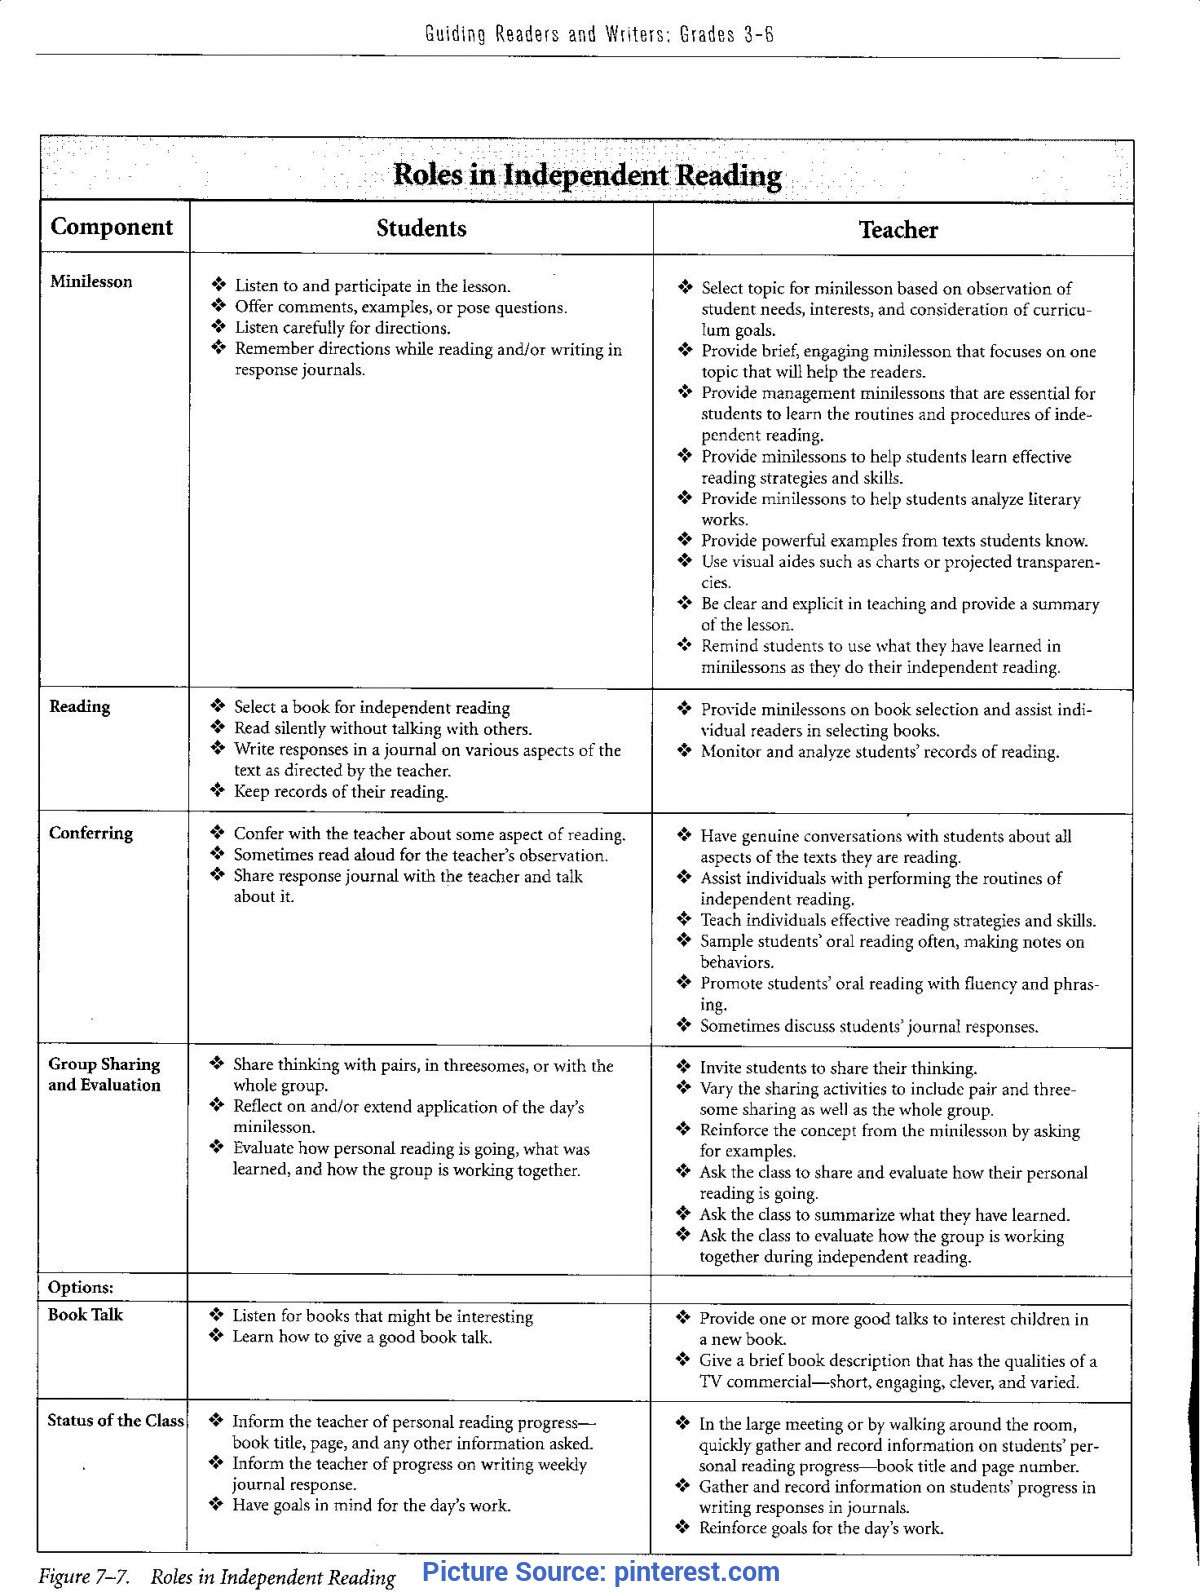 Literacy Lesson Plans Plex Guided Reading Lesson Plan Template for 3rd Grade